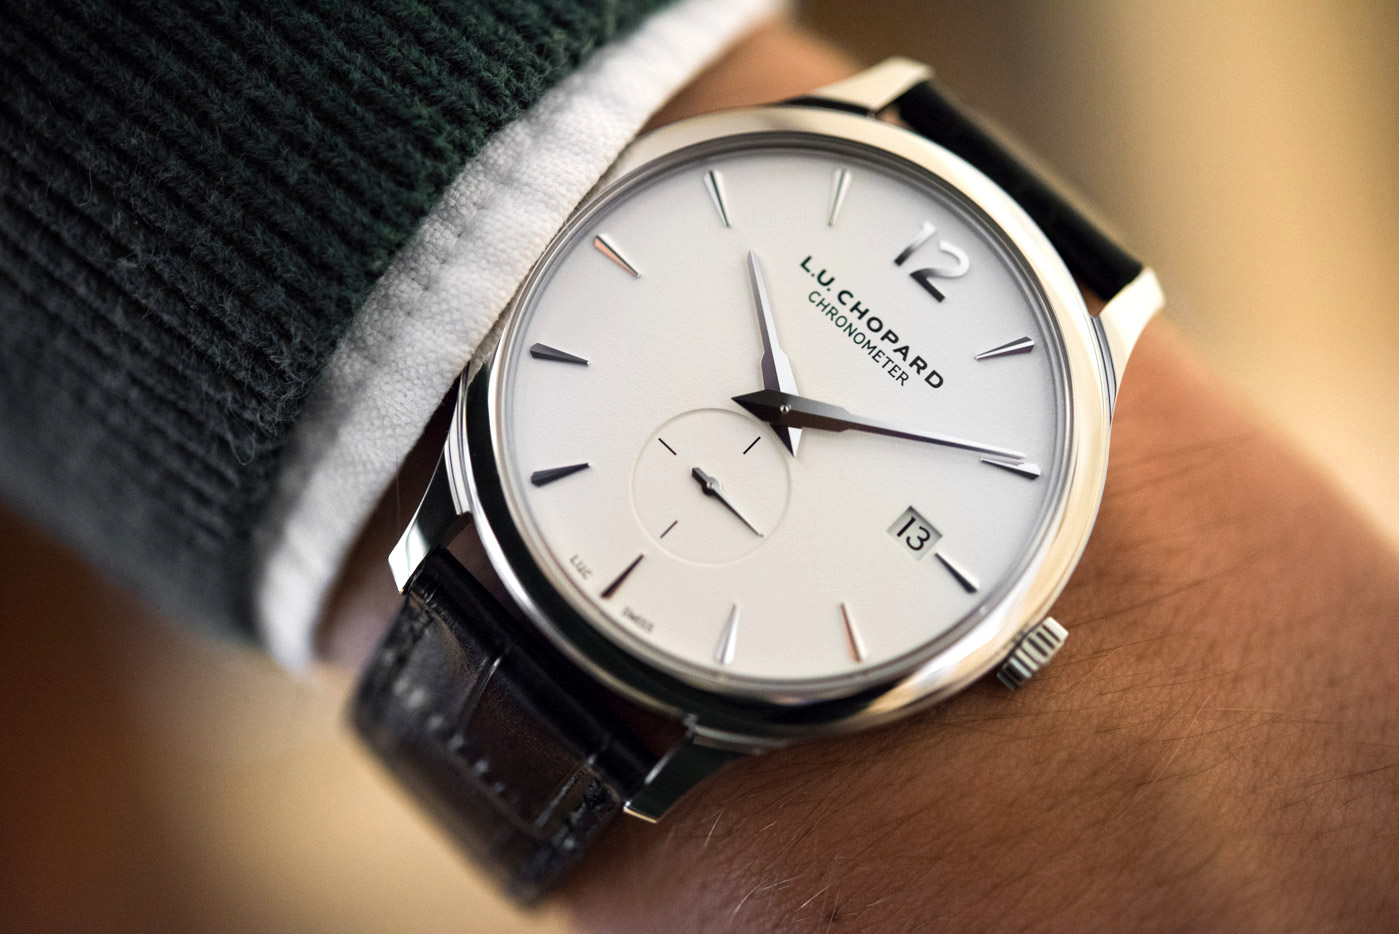 Hands-On Review - Chopard L.U.C XPS 1860 in stainless steel - High